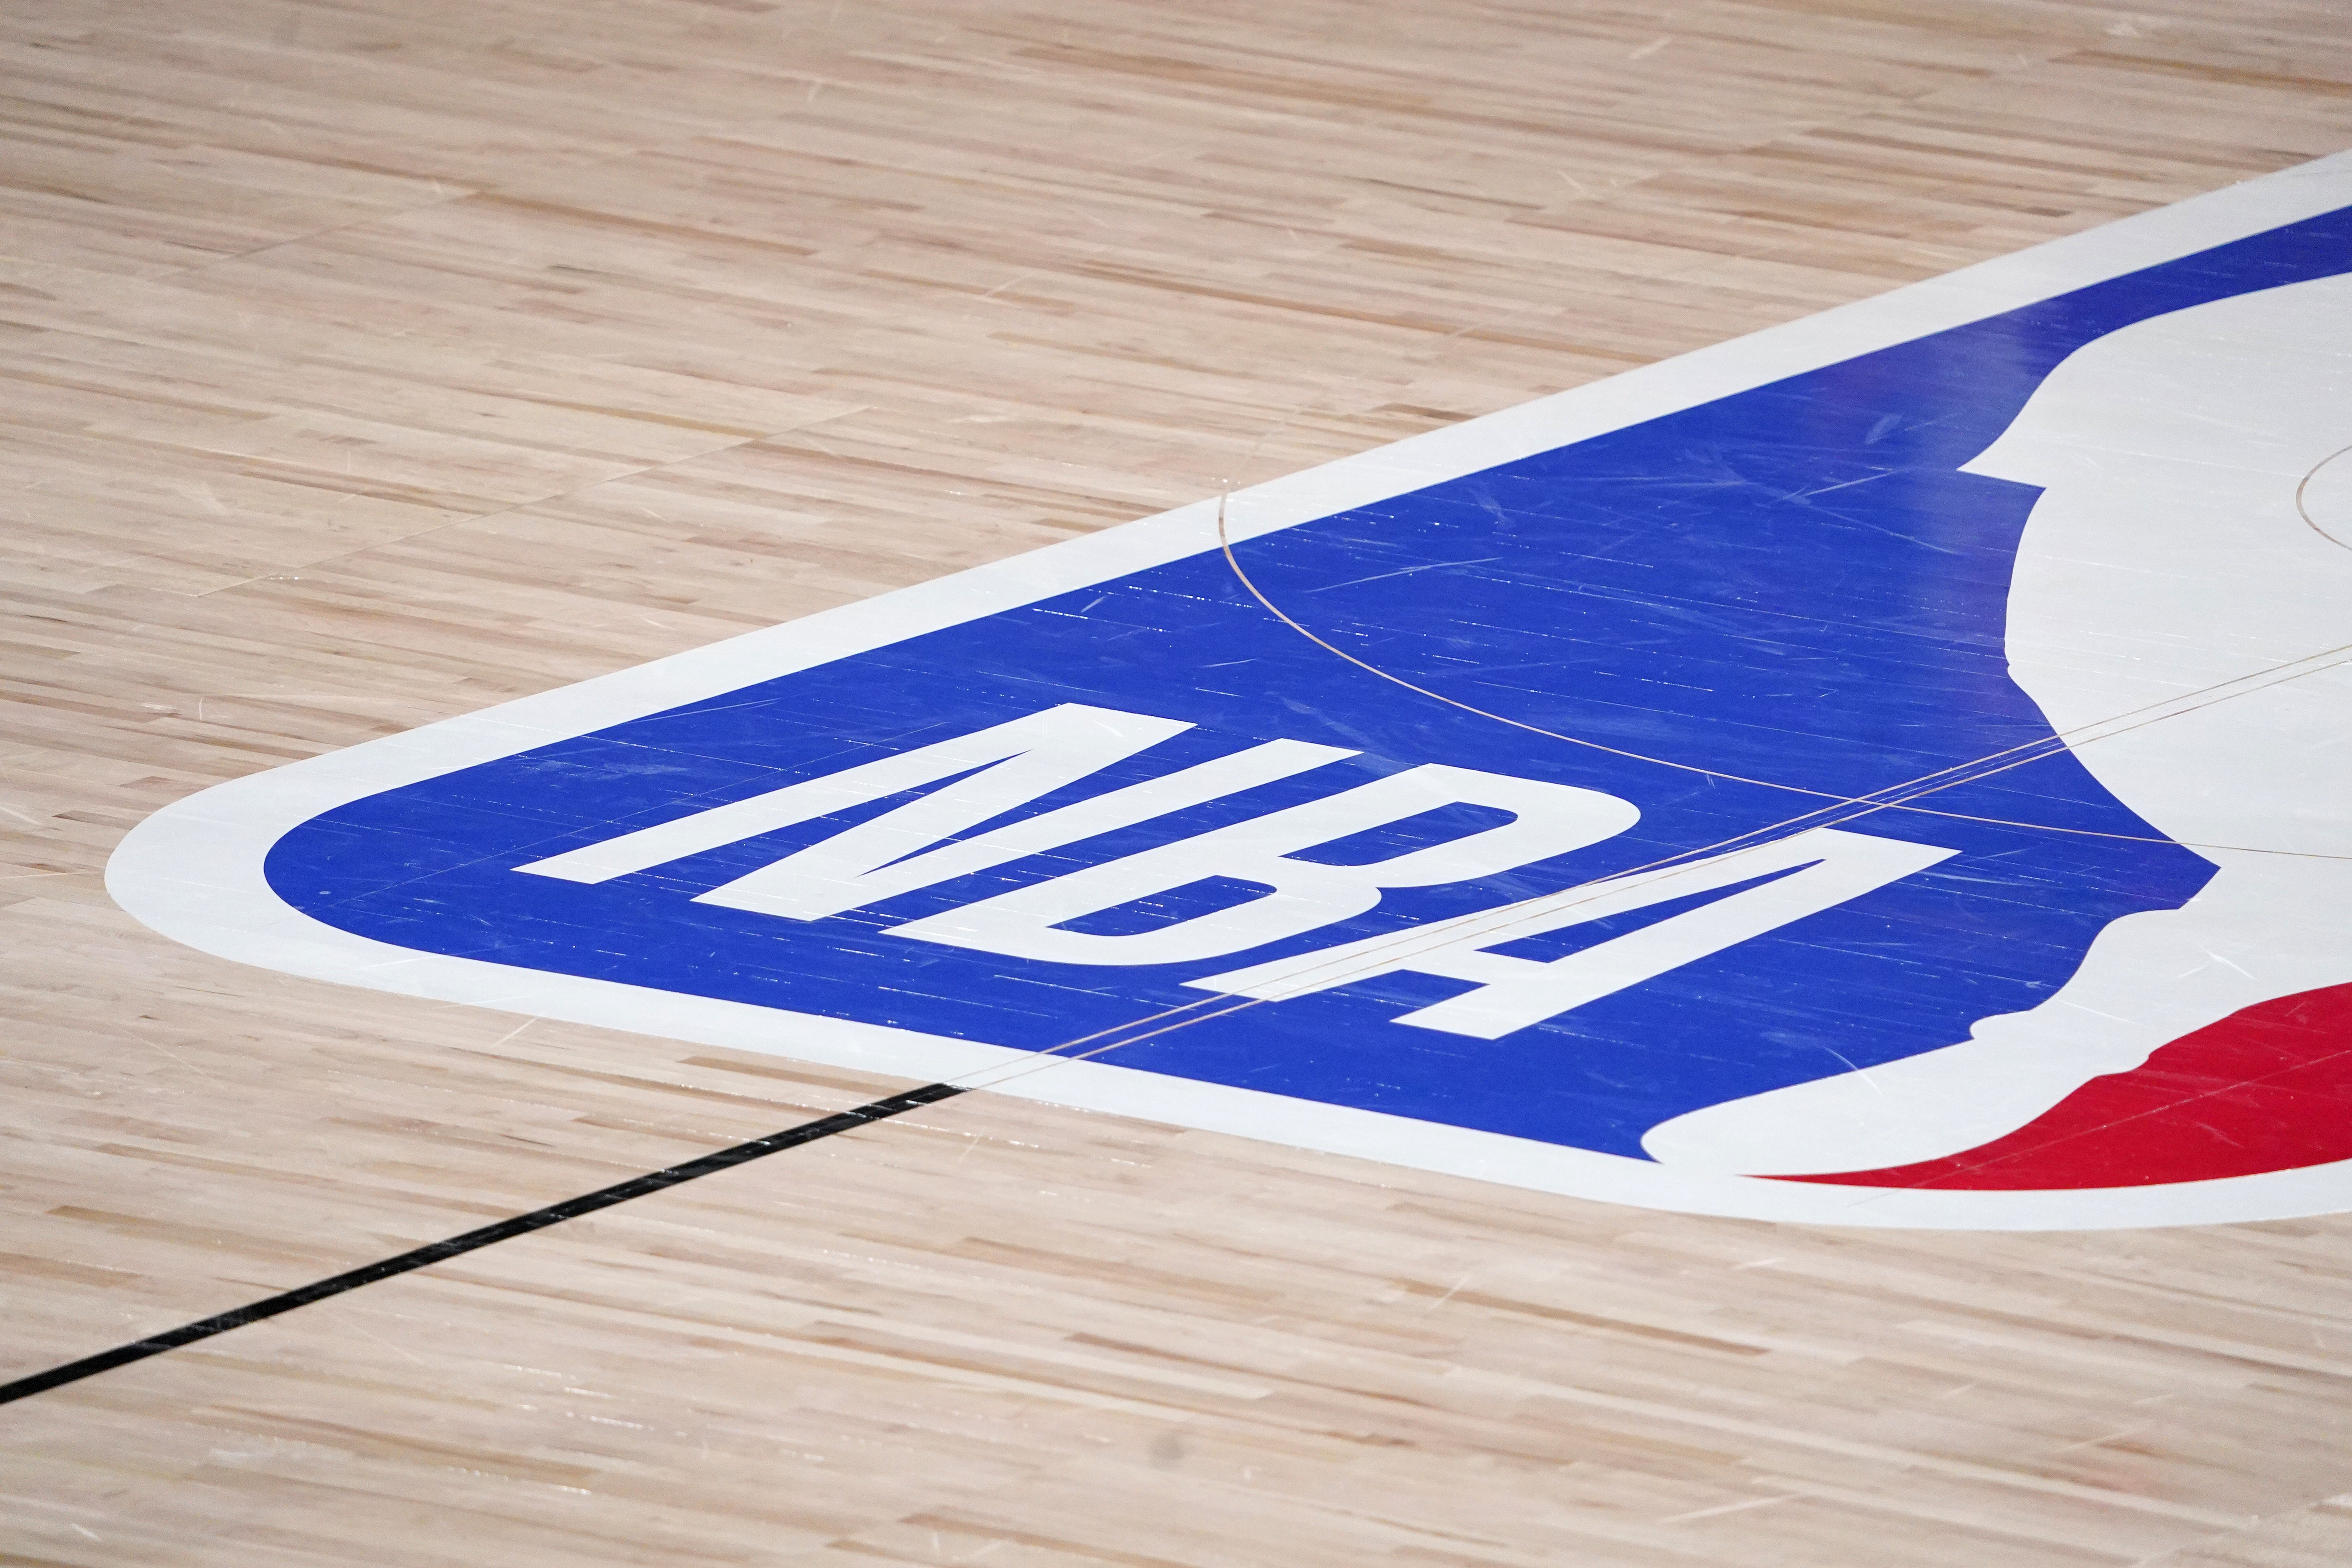 Nba Season 2022 23 Schedule Nba Schedule 2022: Regular Season, Playoffs, Finals And Key Dates  Reportedly Revealed | Bleacher Report | Latest News, Videos And Highlights